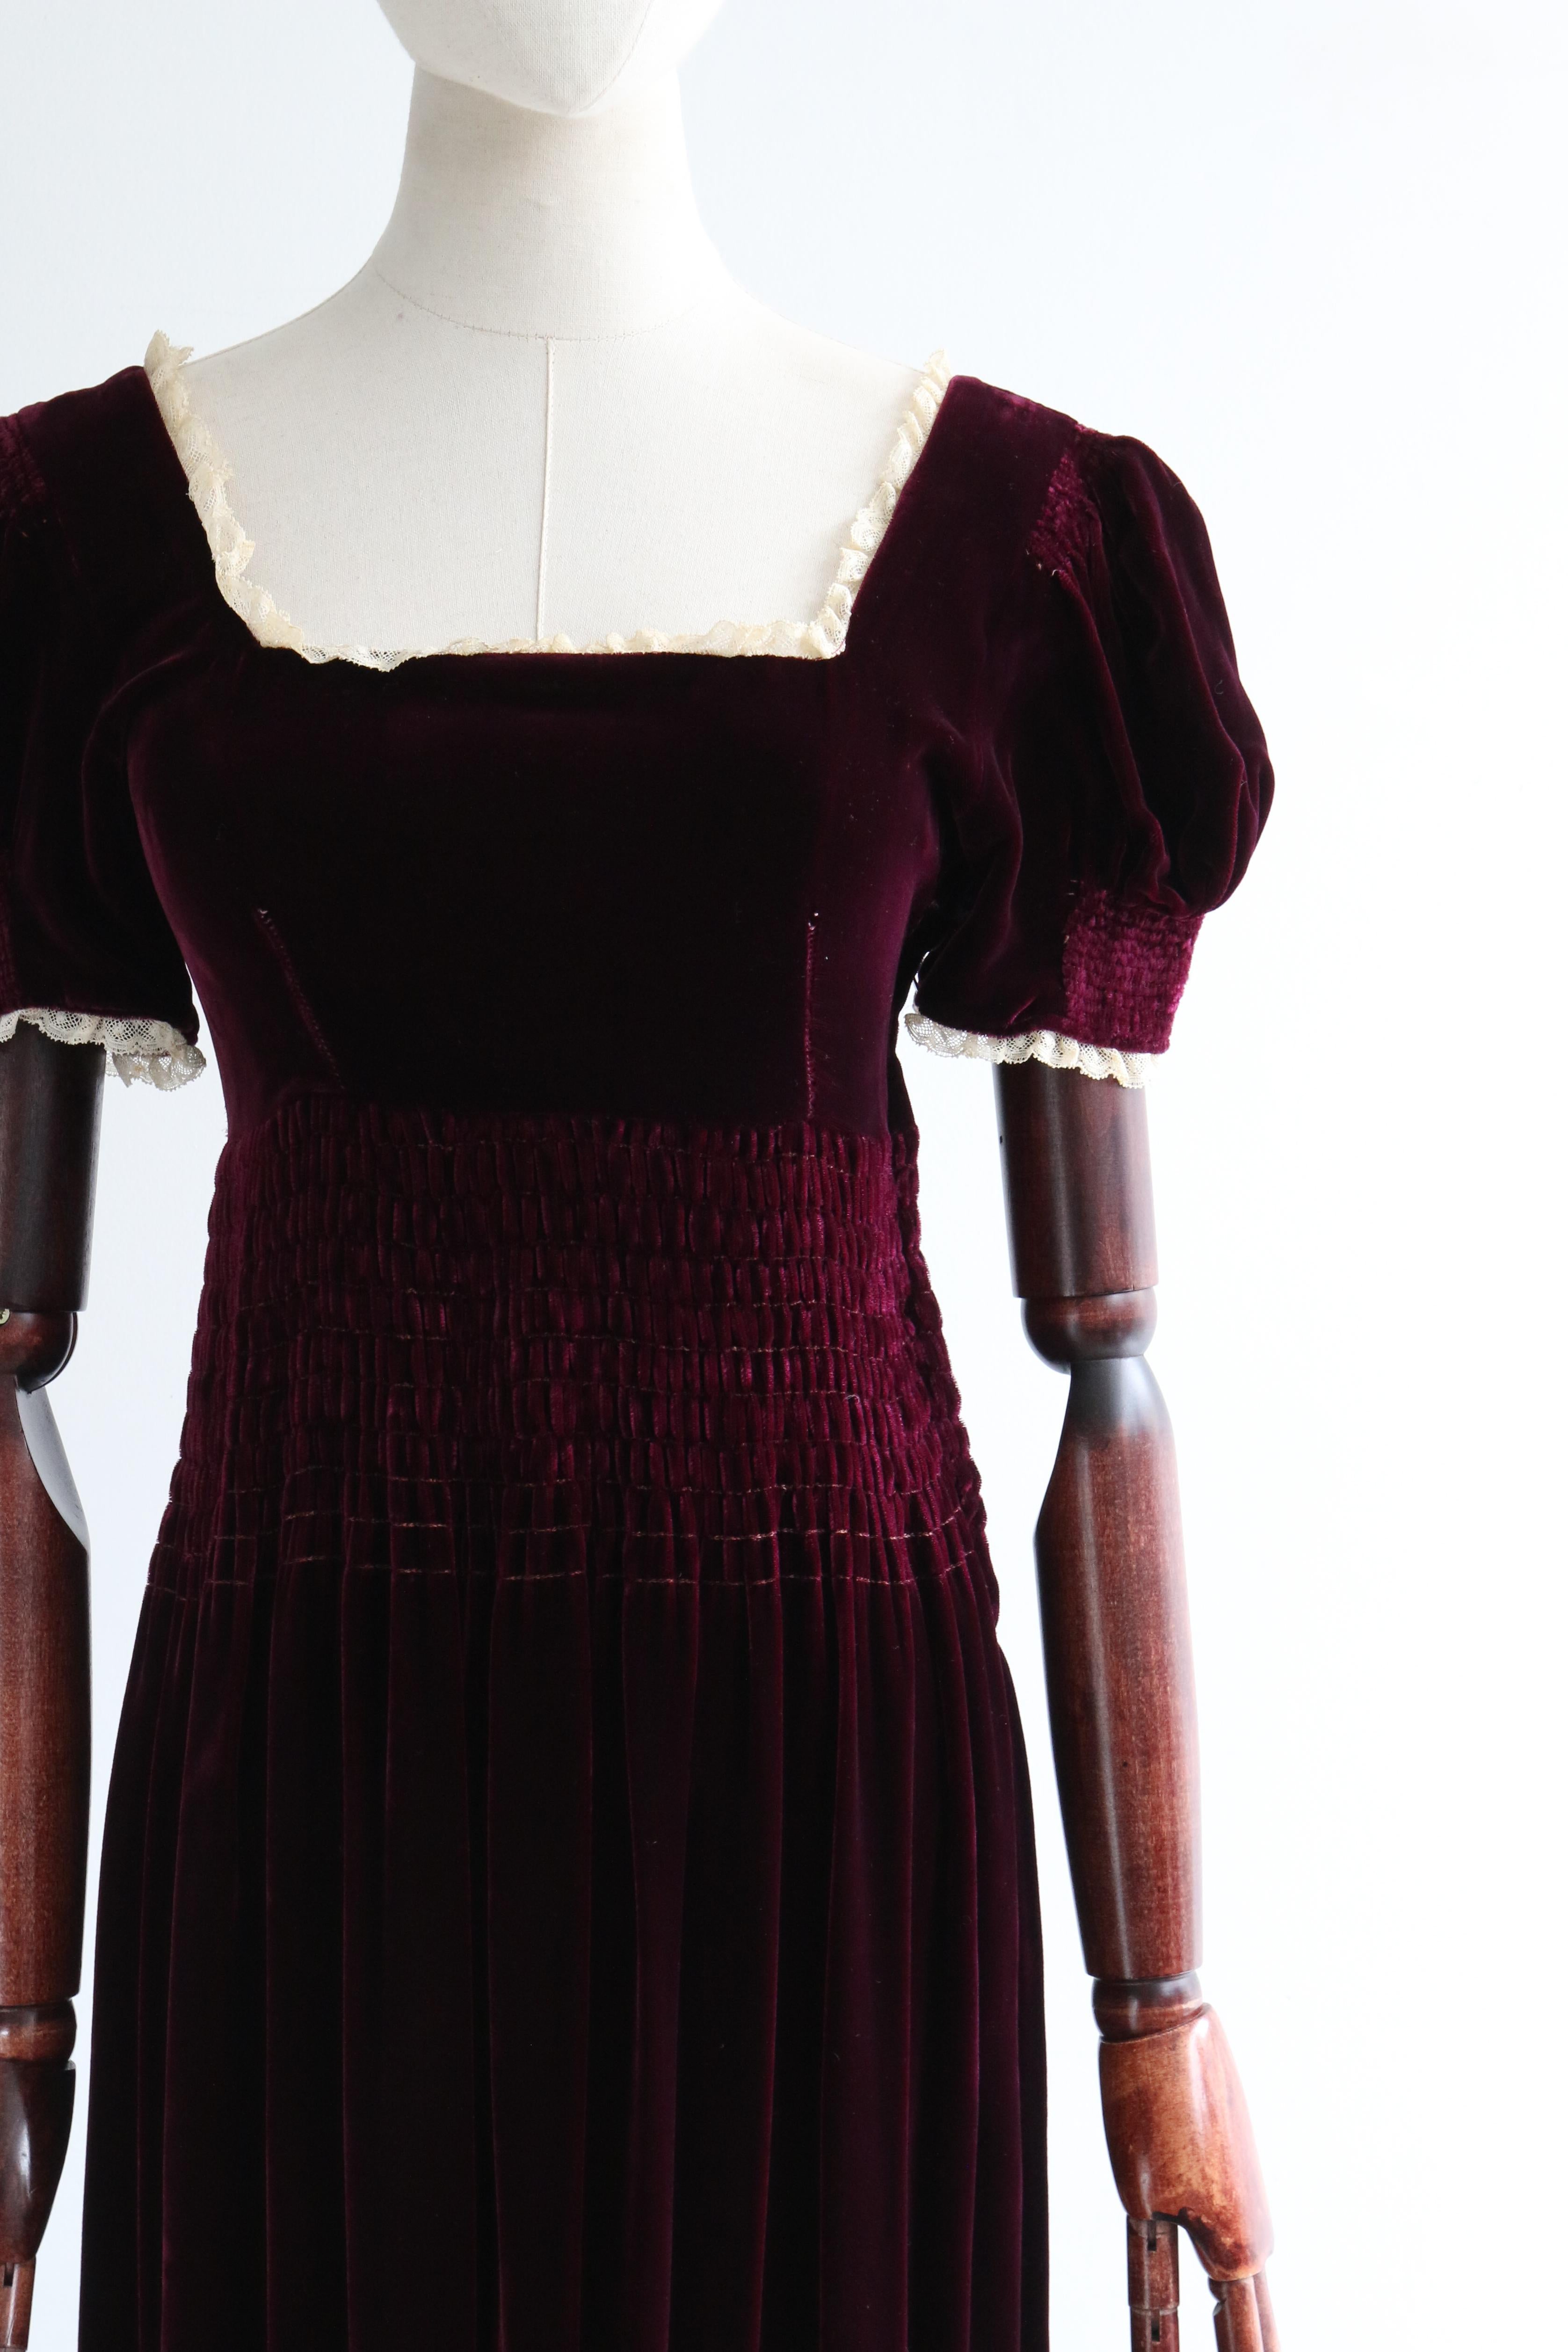 This breathtaking 1930's burgundy silk velvet dress, accented by cream lace details, is just the piece for your transitional wardrobe. 

The rounded neckline is edged with a border of scalloped cream lace, contouring both the front and back of the